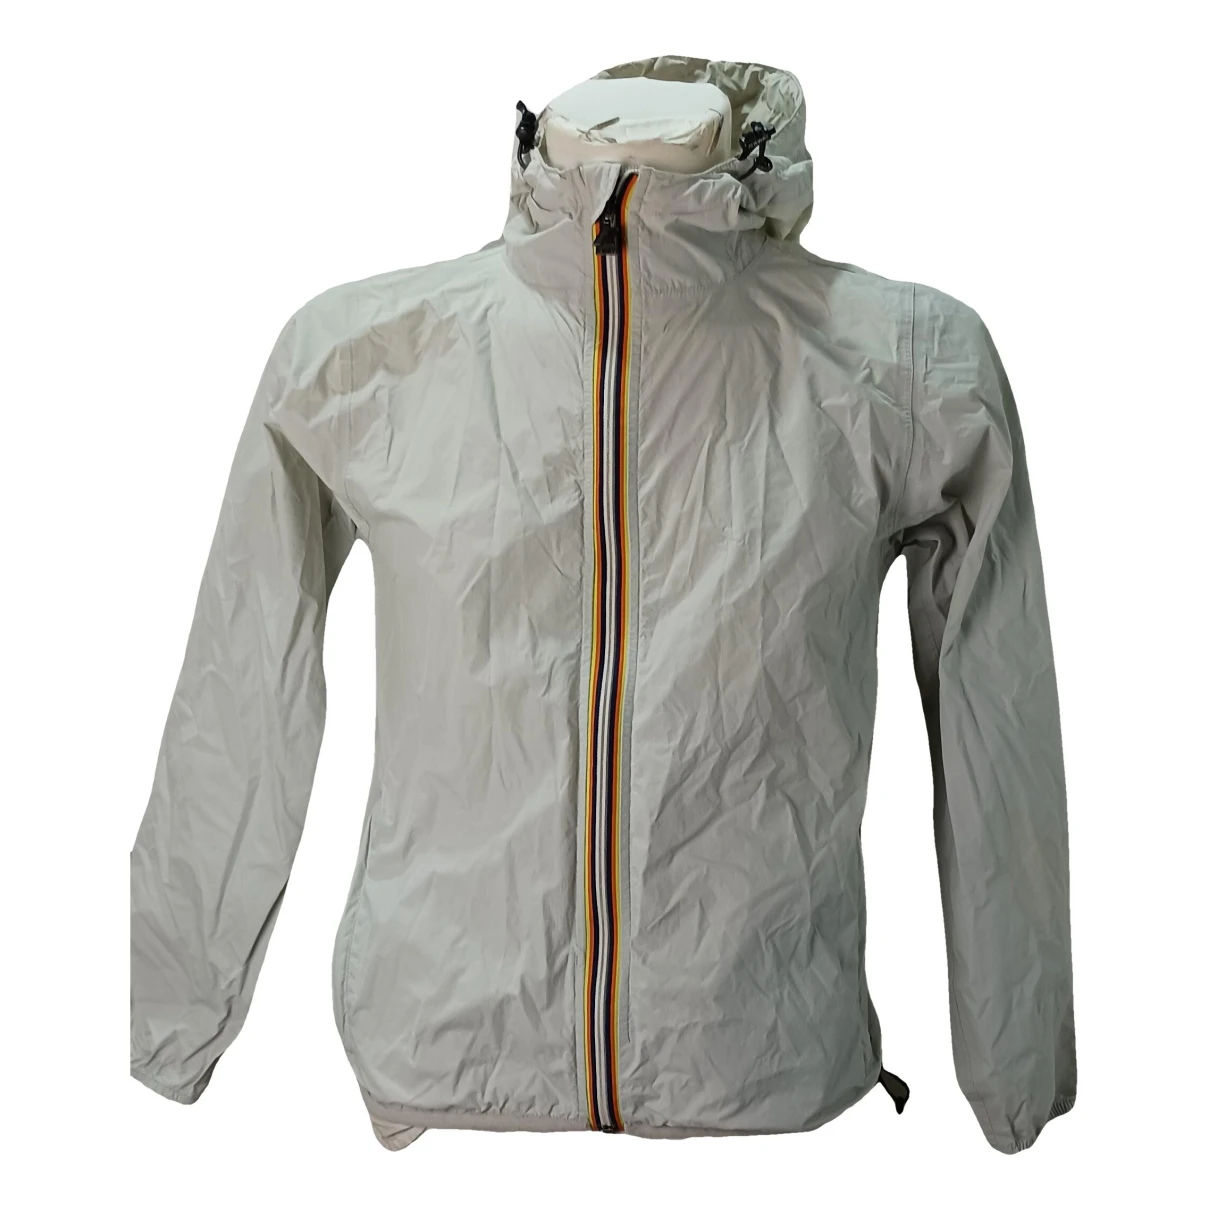 Pre-owned K-way Jacket In White